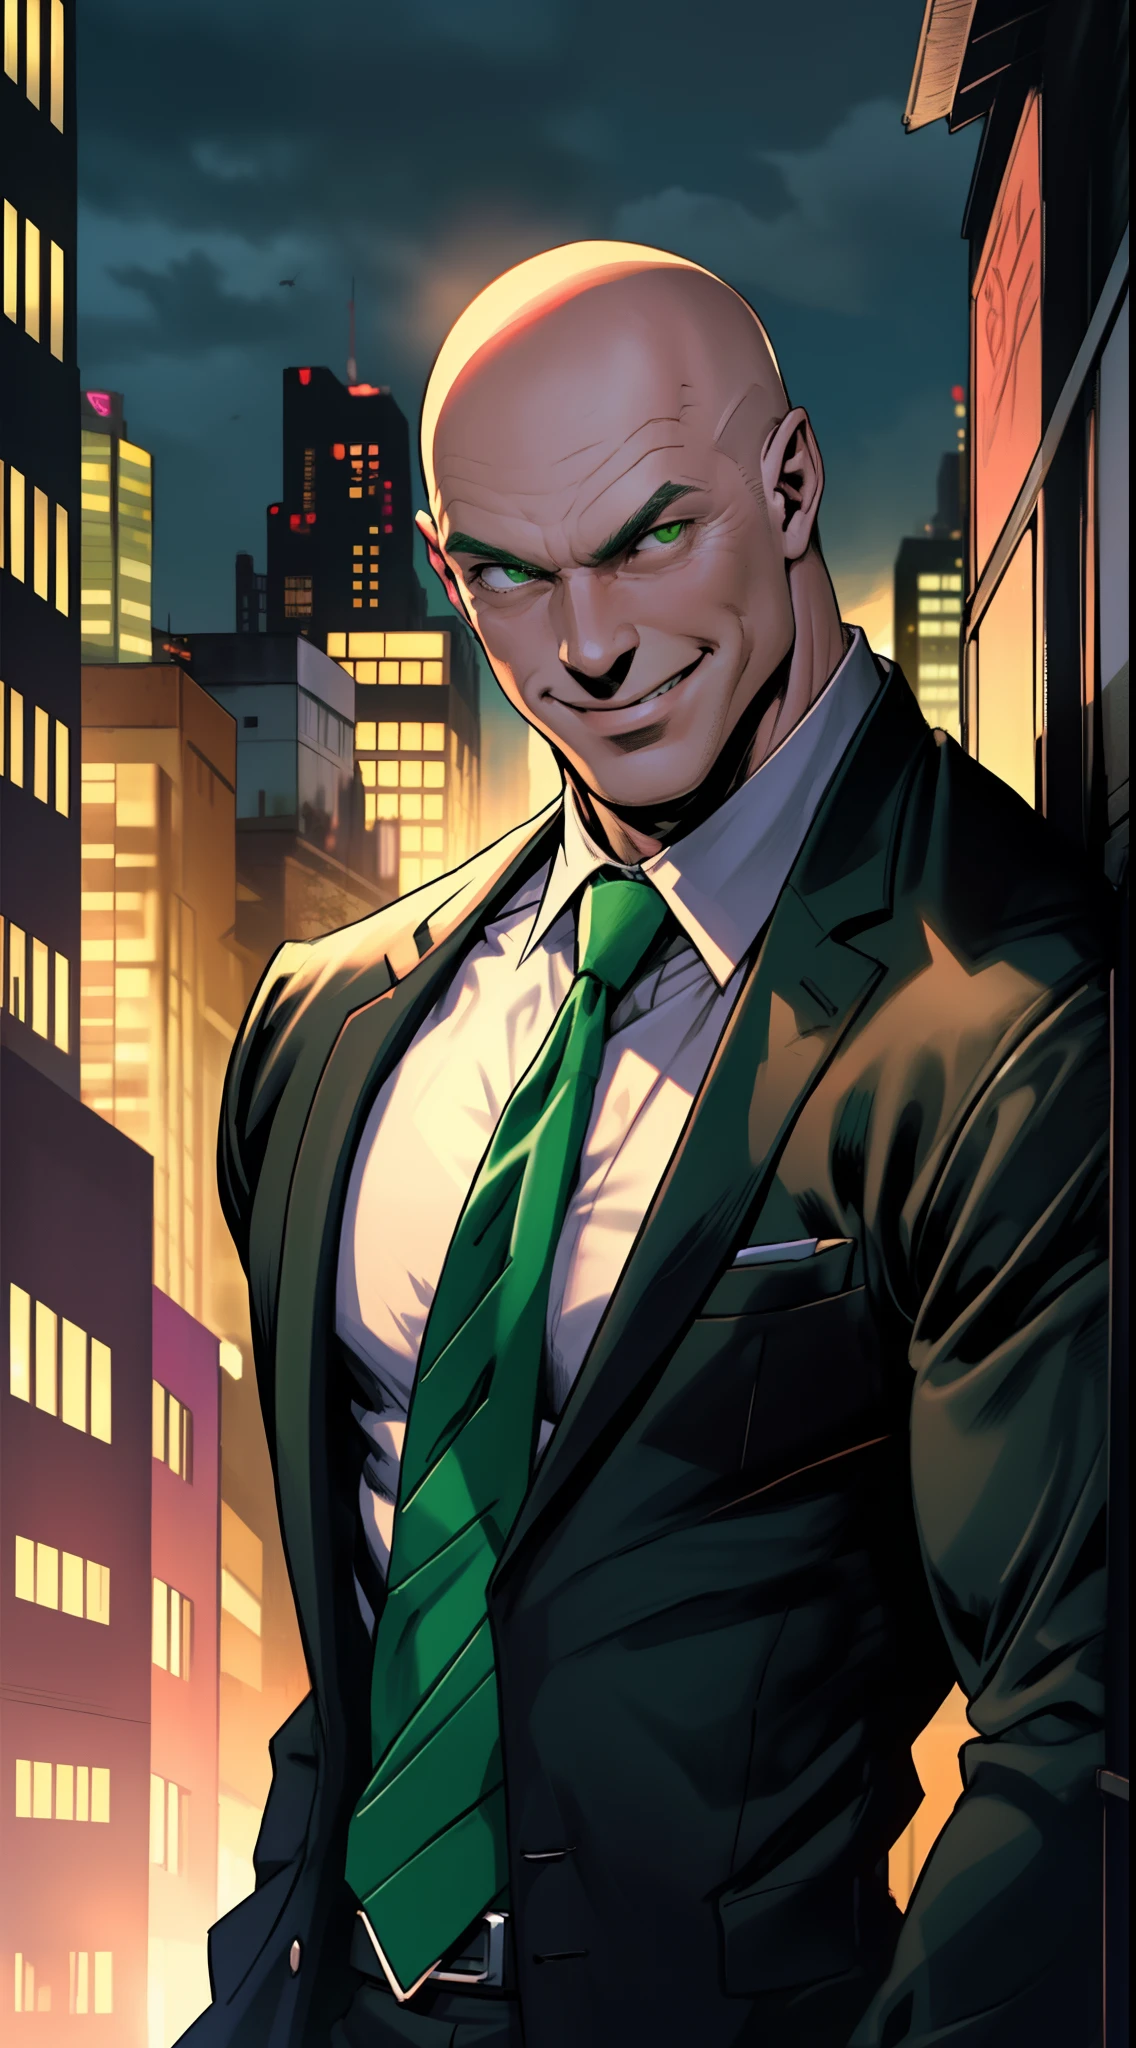 1 man, solo, upper body shot, Lex Luthor, middle-aged man, bald head, lean muscle, broad shoulder, (evil smile), bald head, no hair, wearing a black suit, bright green tie, black dresshirt, city in the background, dusk